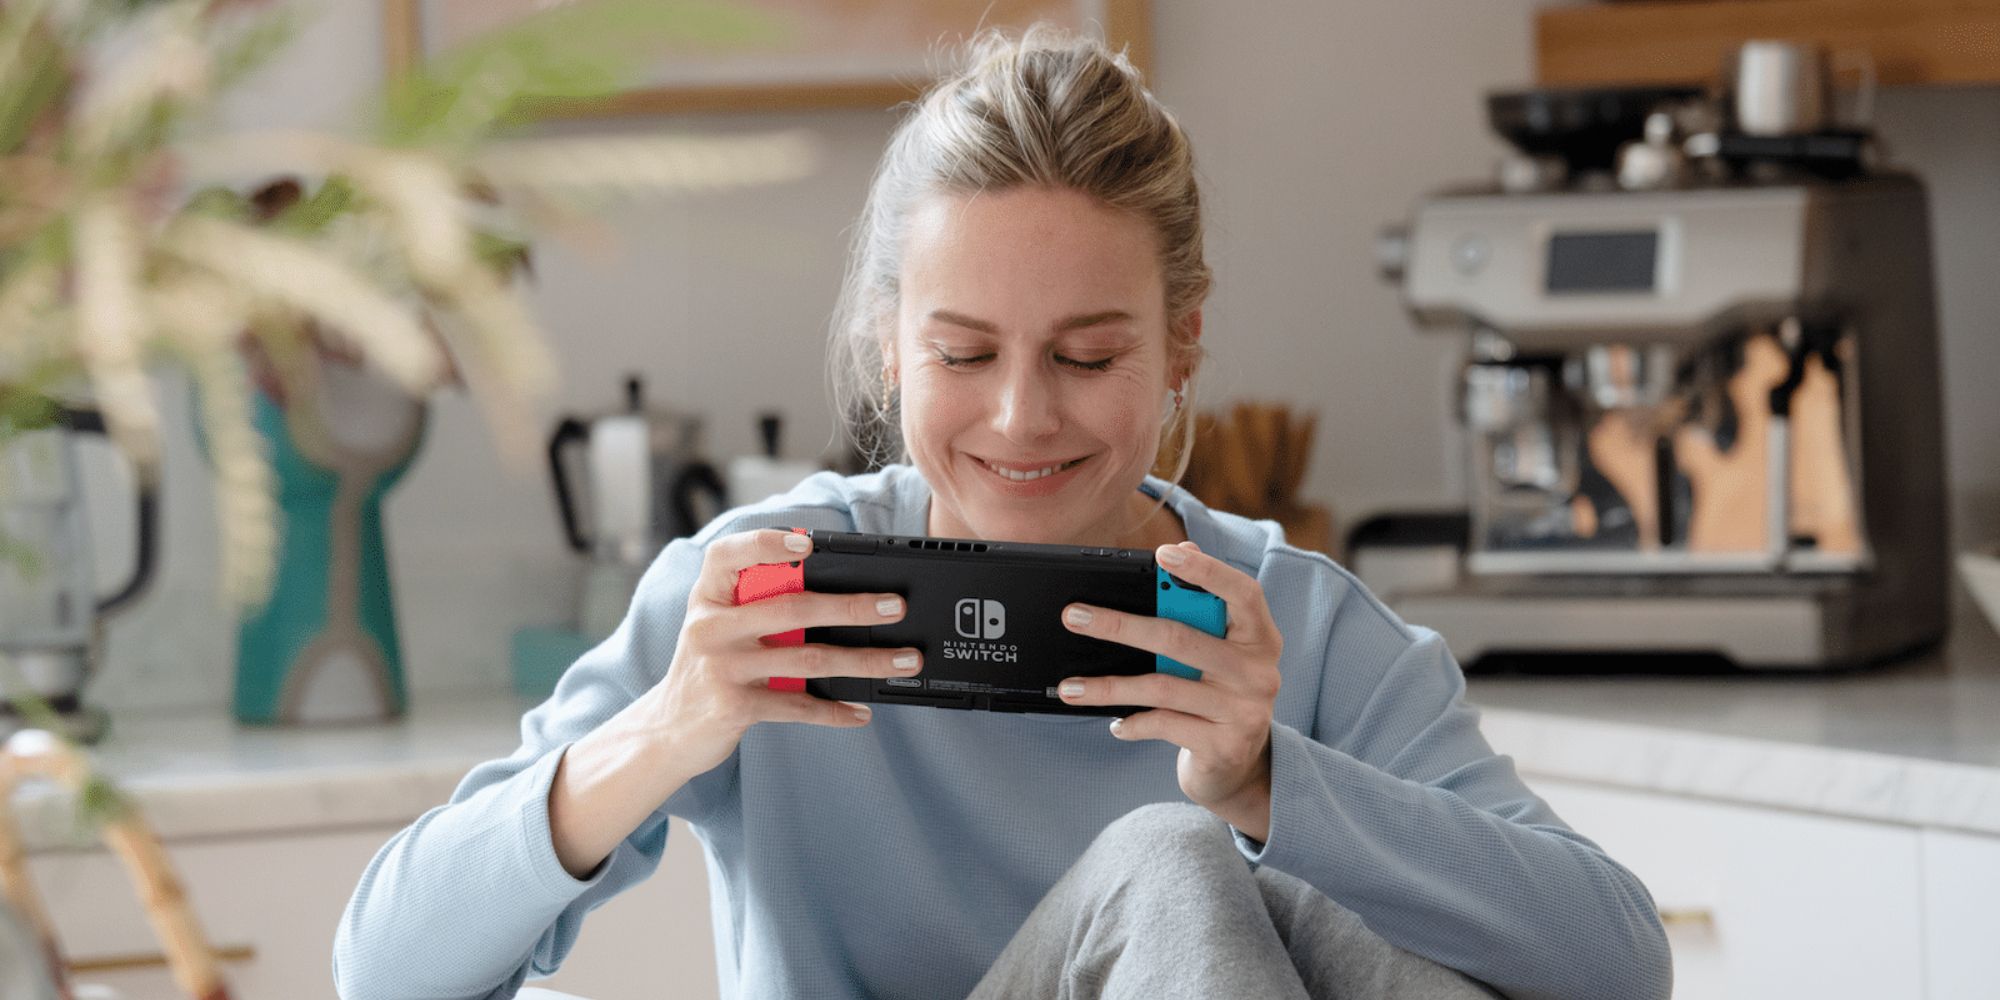 Brie Larson smiling playing Switch